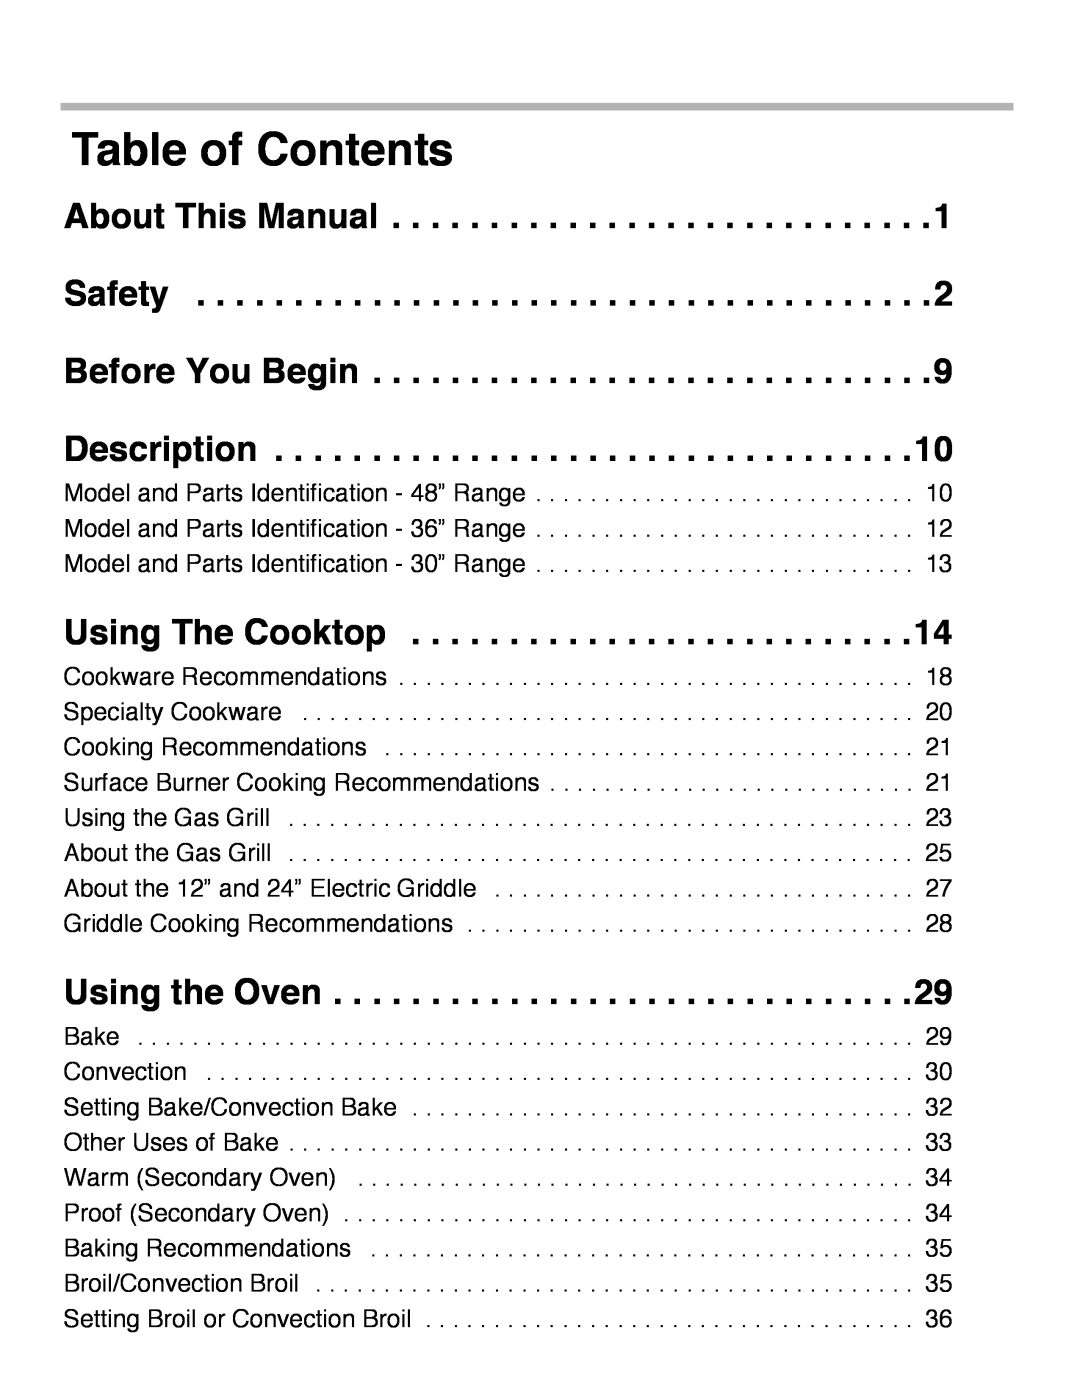 Thermador PRD30, PRD48, PRD36 manual Table of Contents 